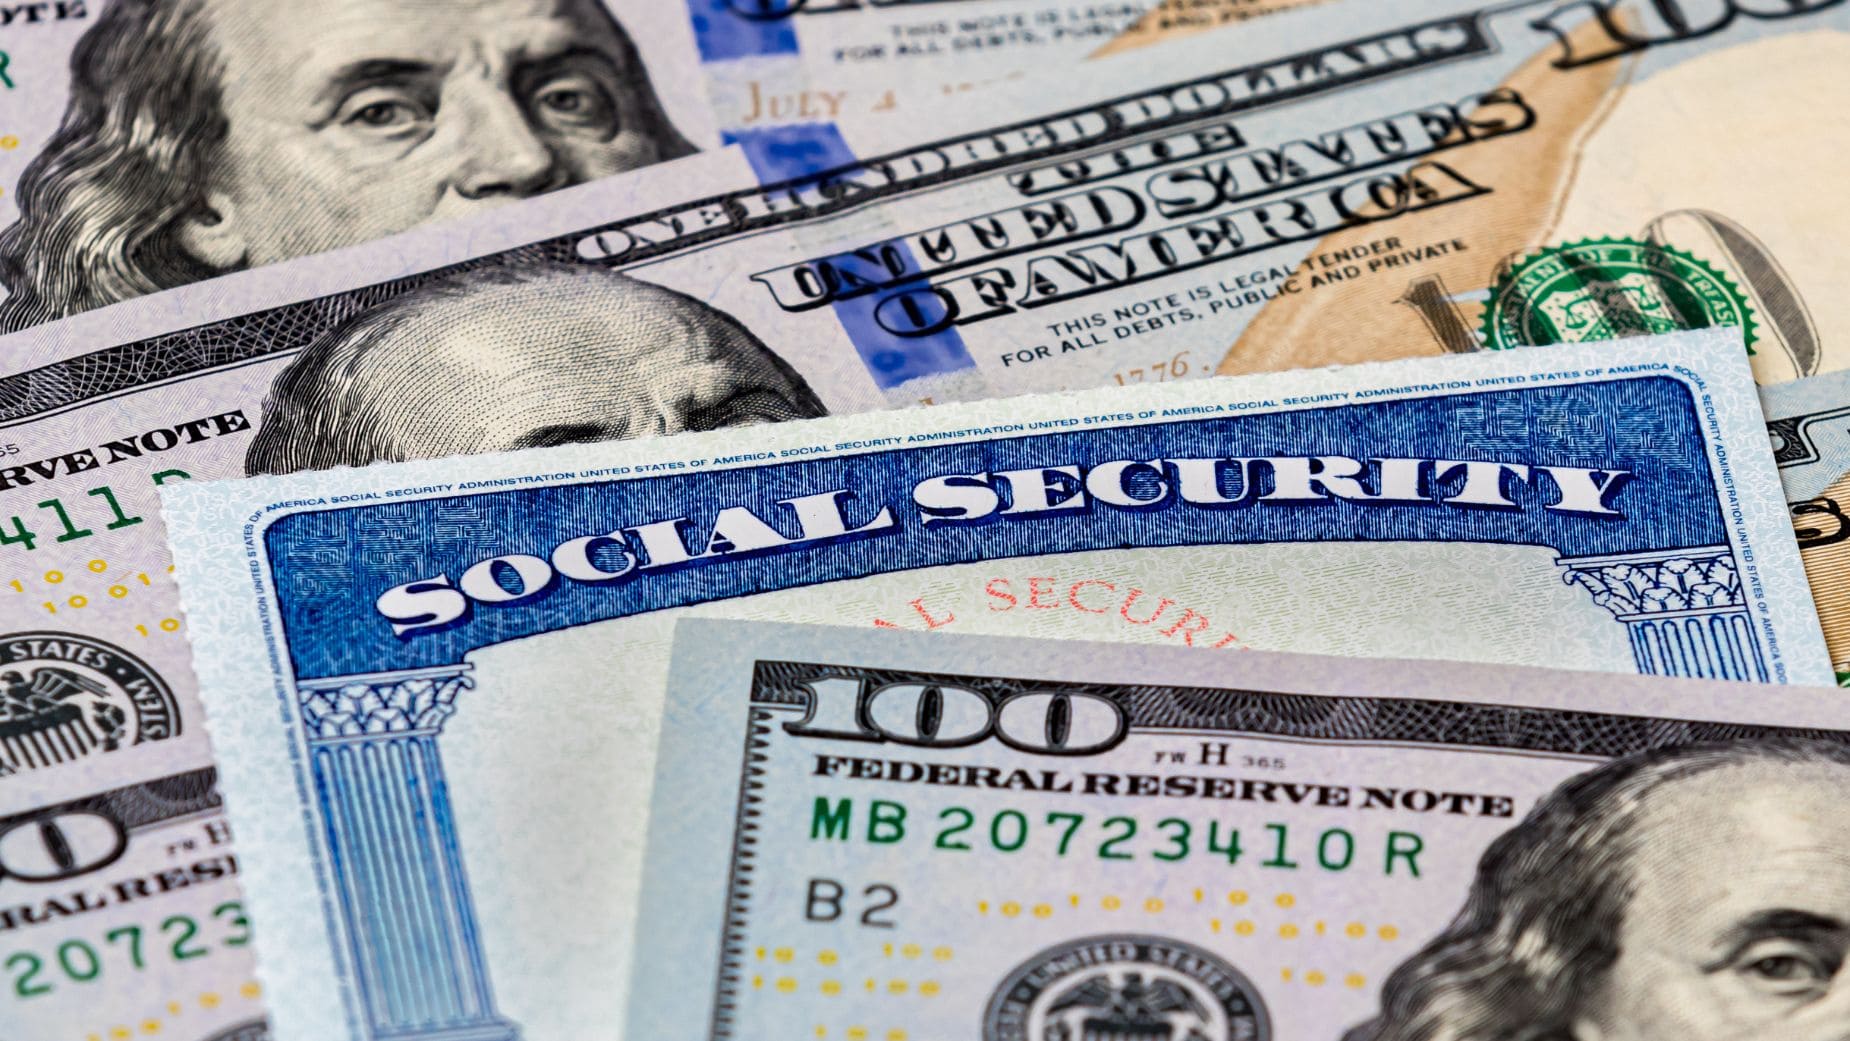 Social Security payments will finish in January in the next week